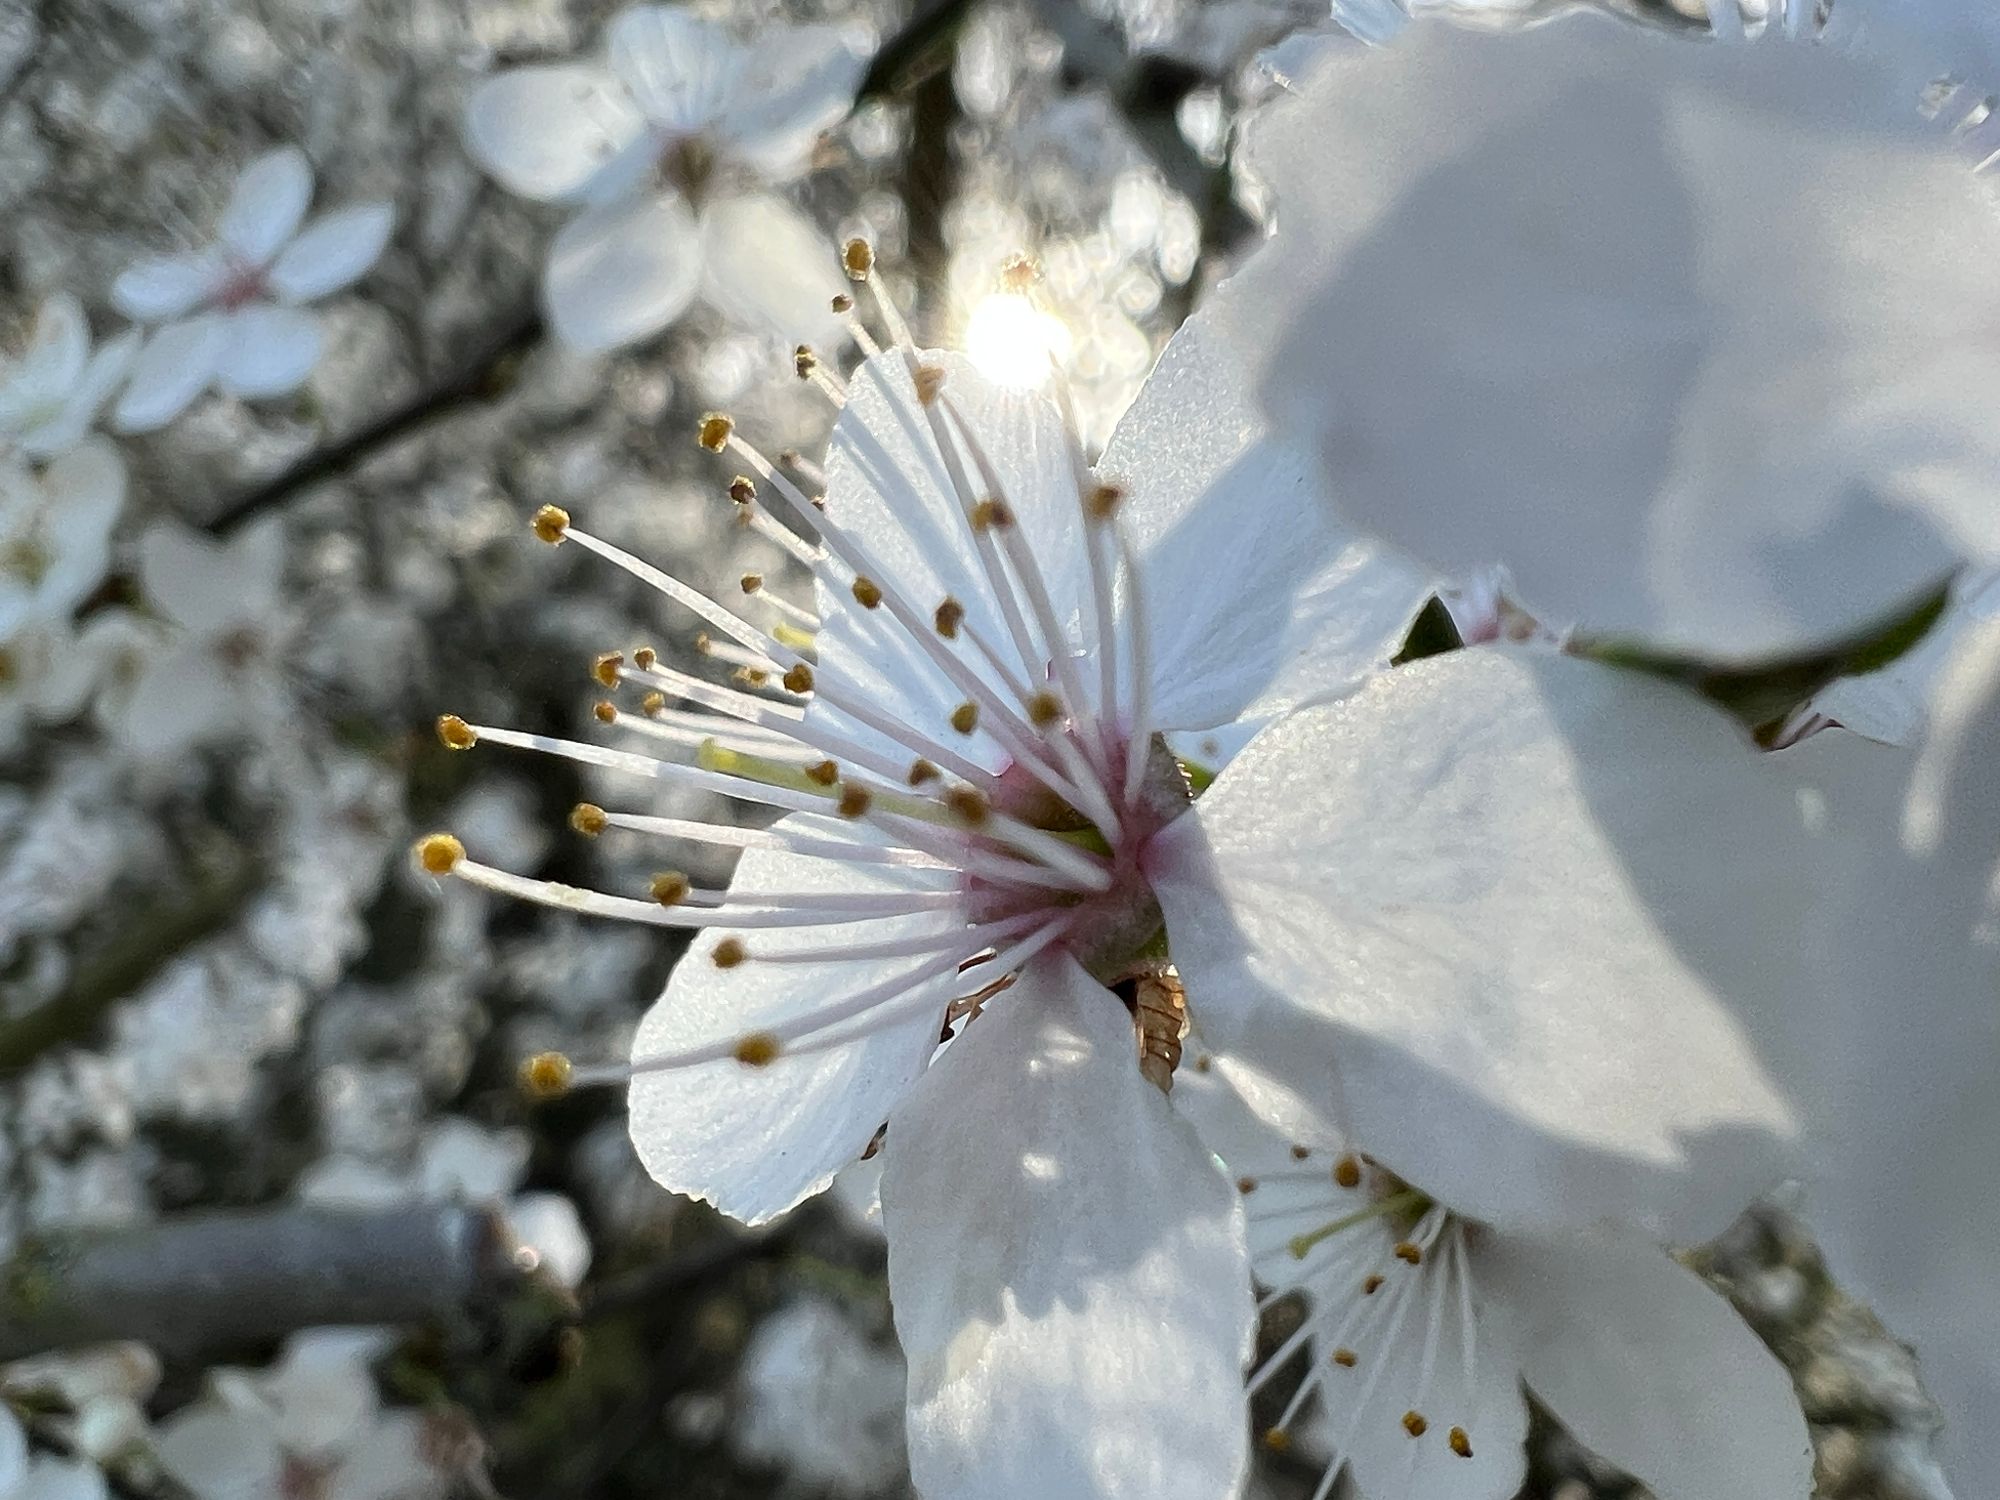 The sun shines through a paper-thin white blossom flower with a pink centre, as more white blossom glimmers behind it.